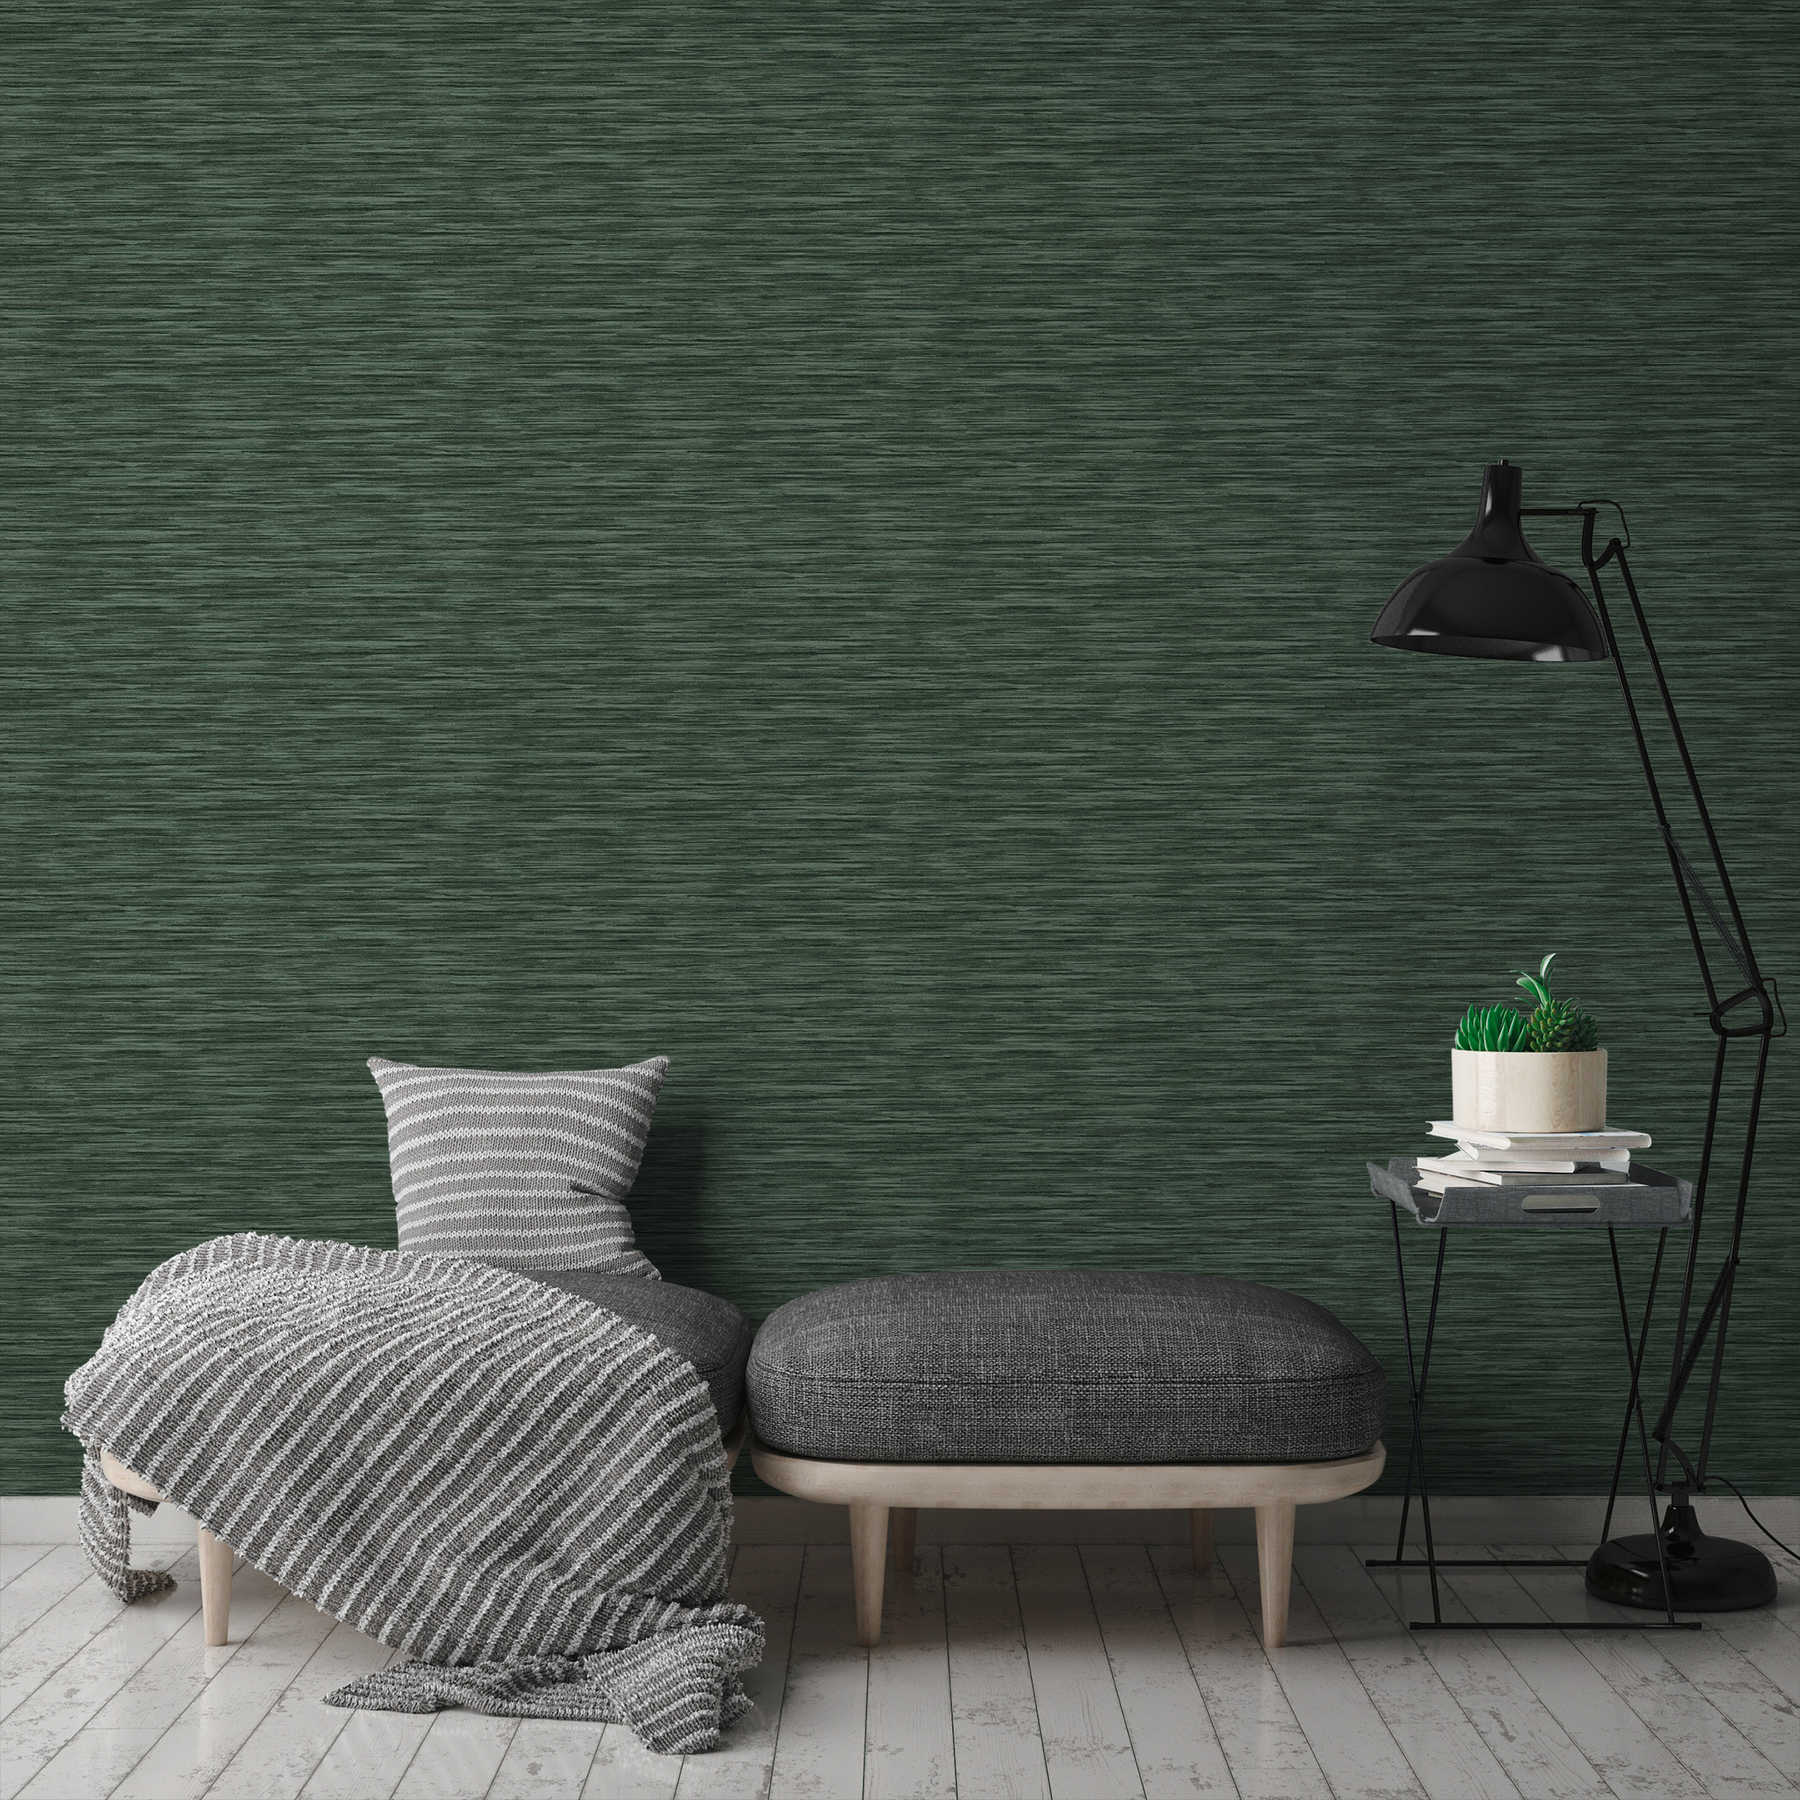             Mottled pattern wallpaper with natural colour hatching - green
        